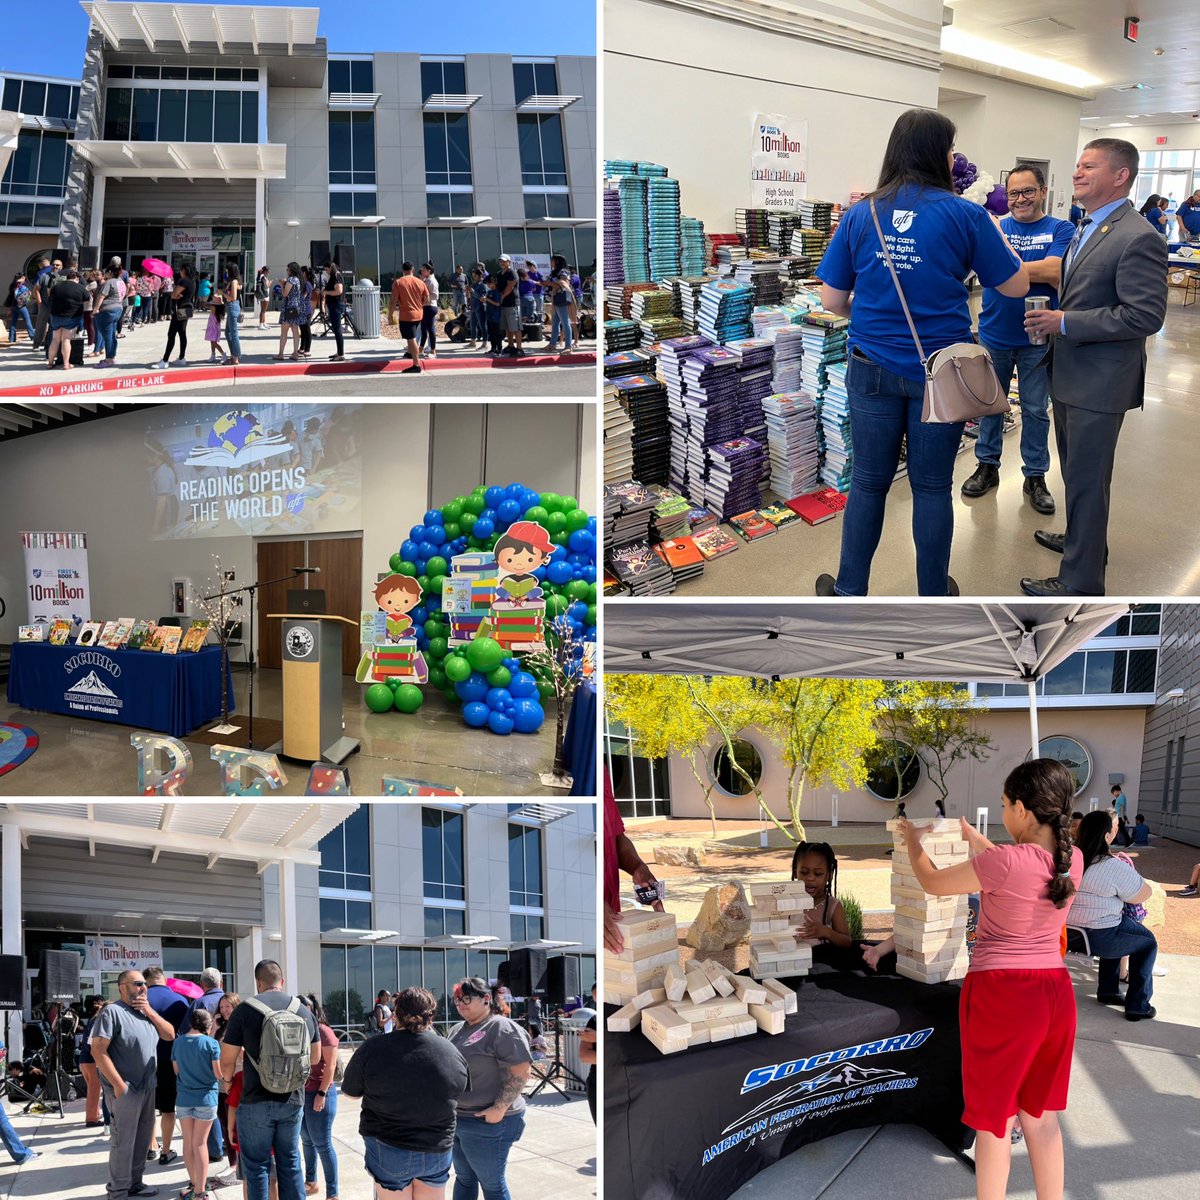 HAPPENING TODAY! Socorro AFT and community partners will distribute 40,000 free books to #TeamSISD students, their families, and educators. Join us at the SISD Technology Services at 12440 Rojas from 11 a.m. to 2 p.m. for kid-friendly activities, free food, and mariachis! 📚